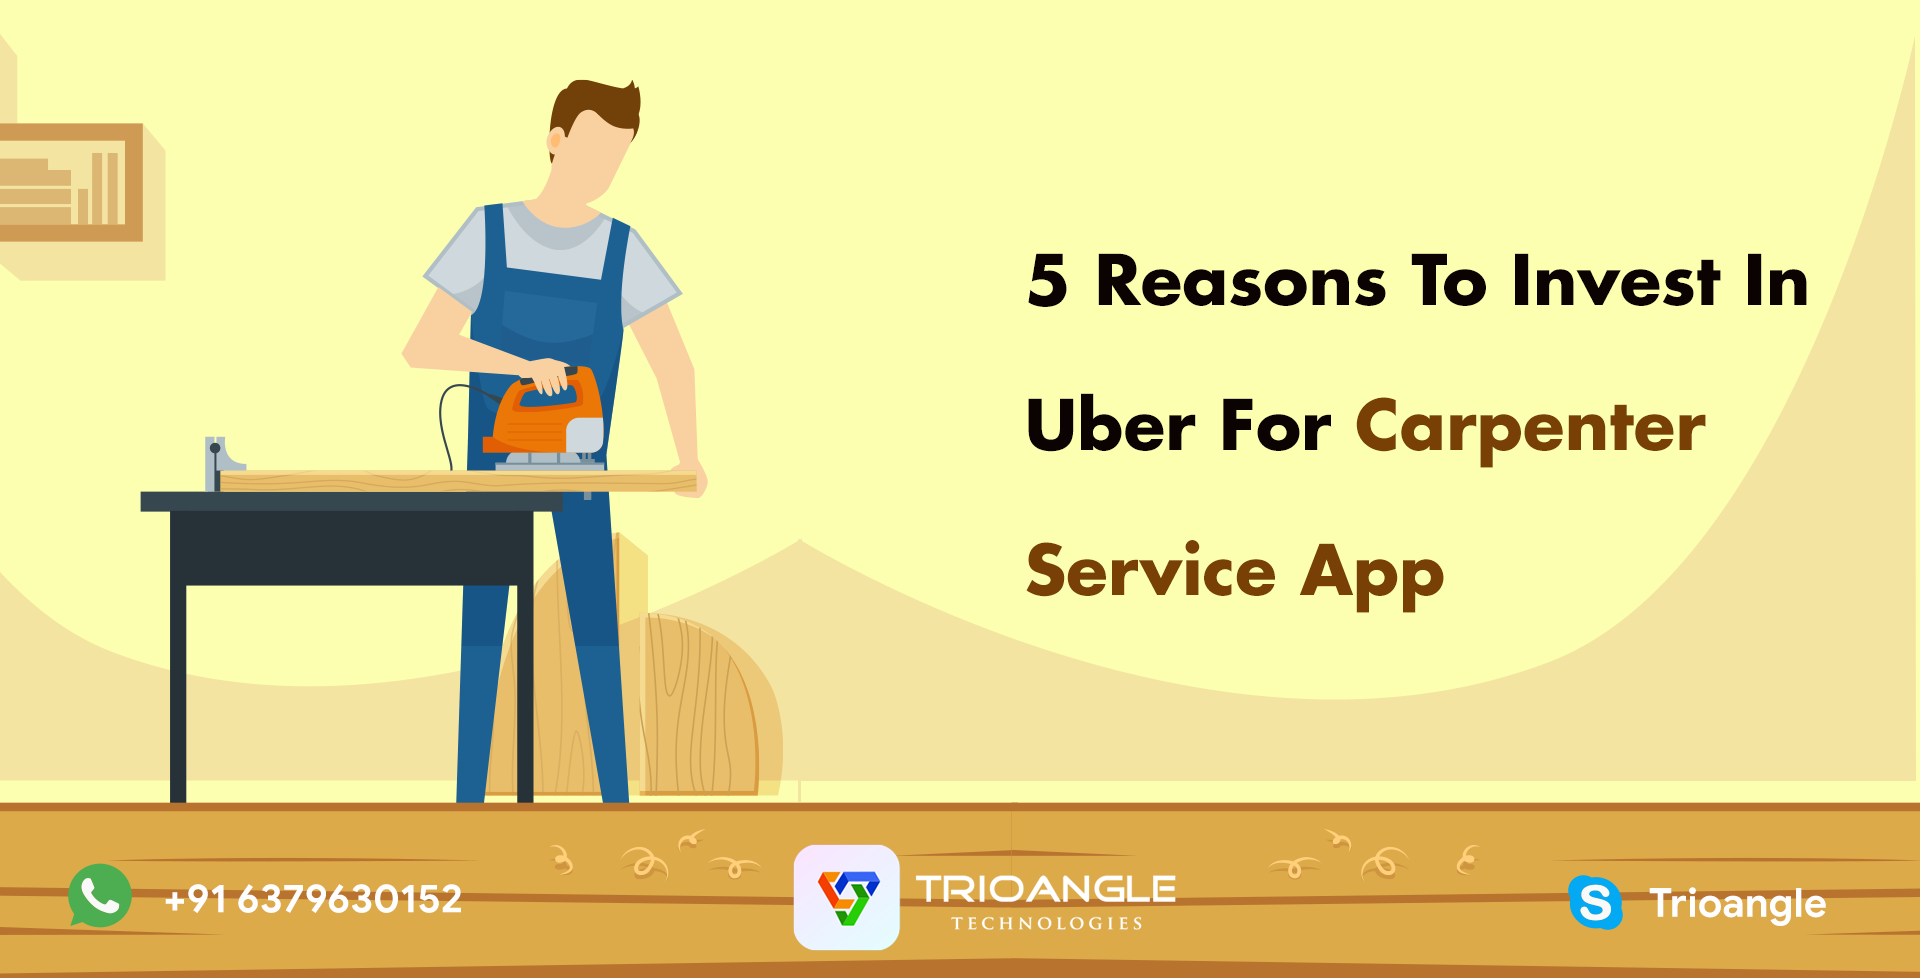 Article about 5 Reasons To Invest In Uber For Carpenter Service App